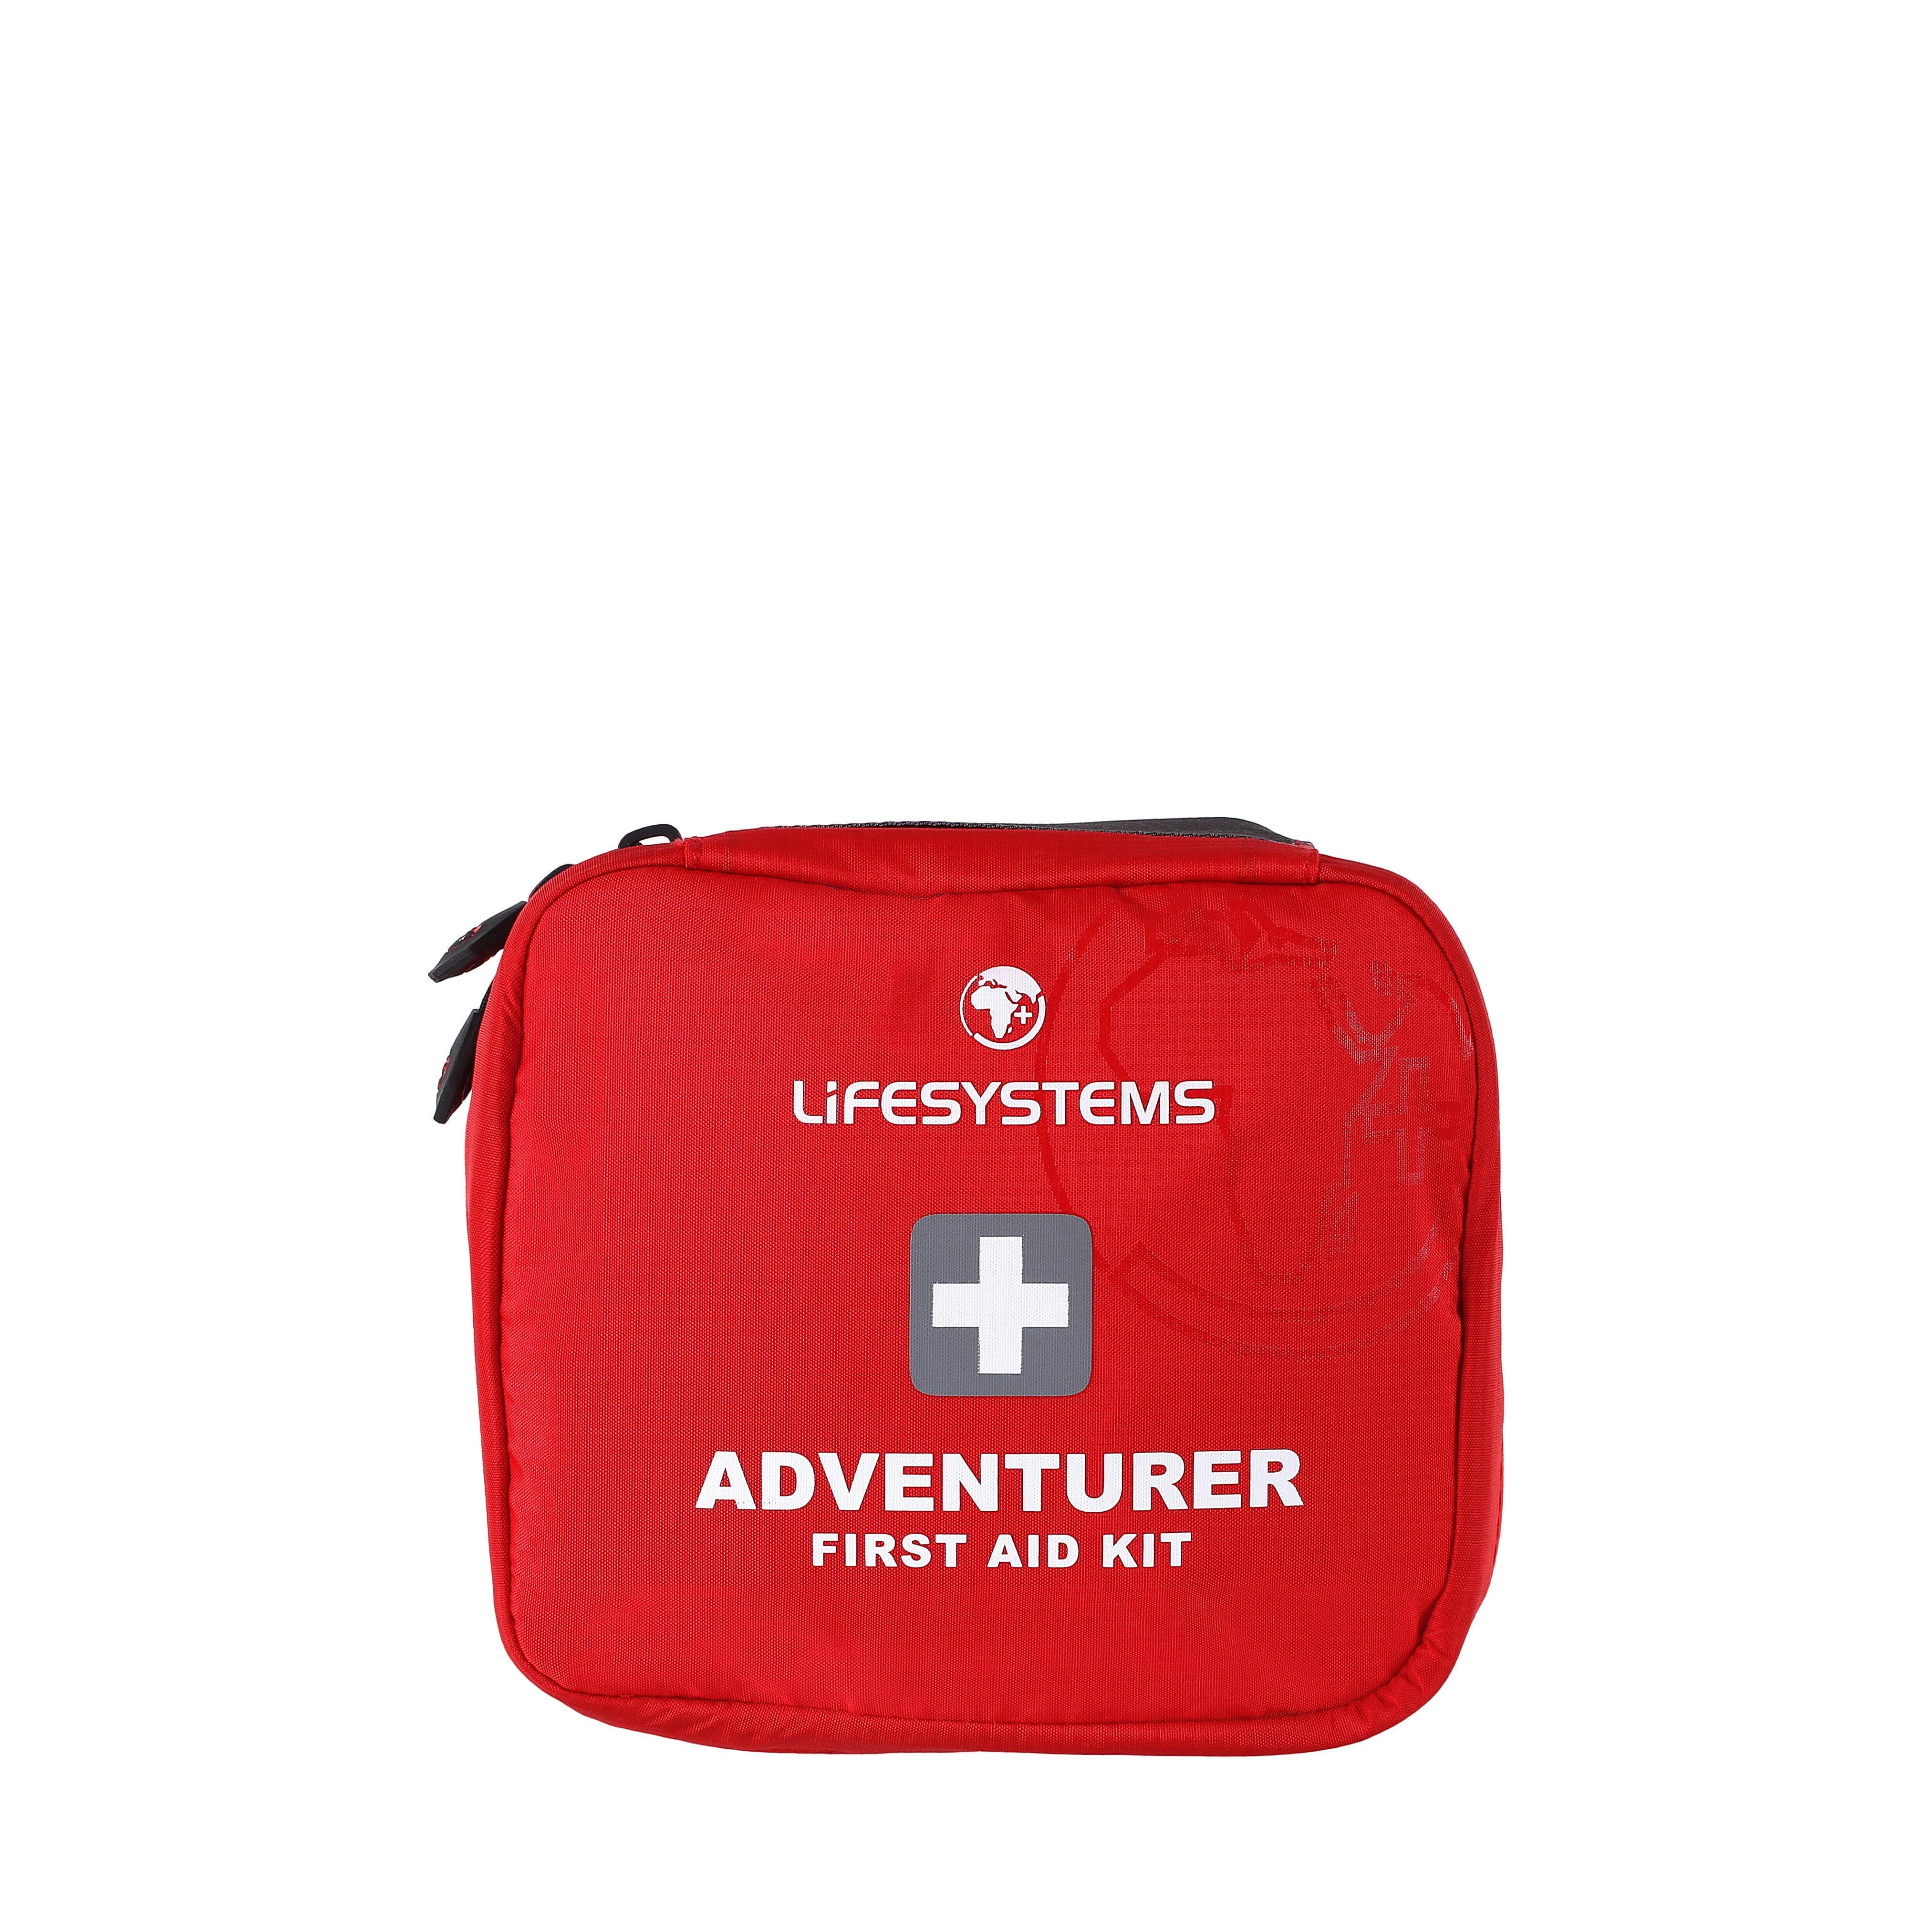 Life Systems Adventurer First Aid Kit | LIFESYSTEMS | Portwest